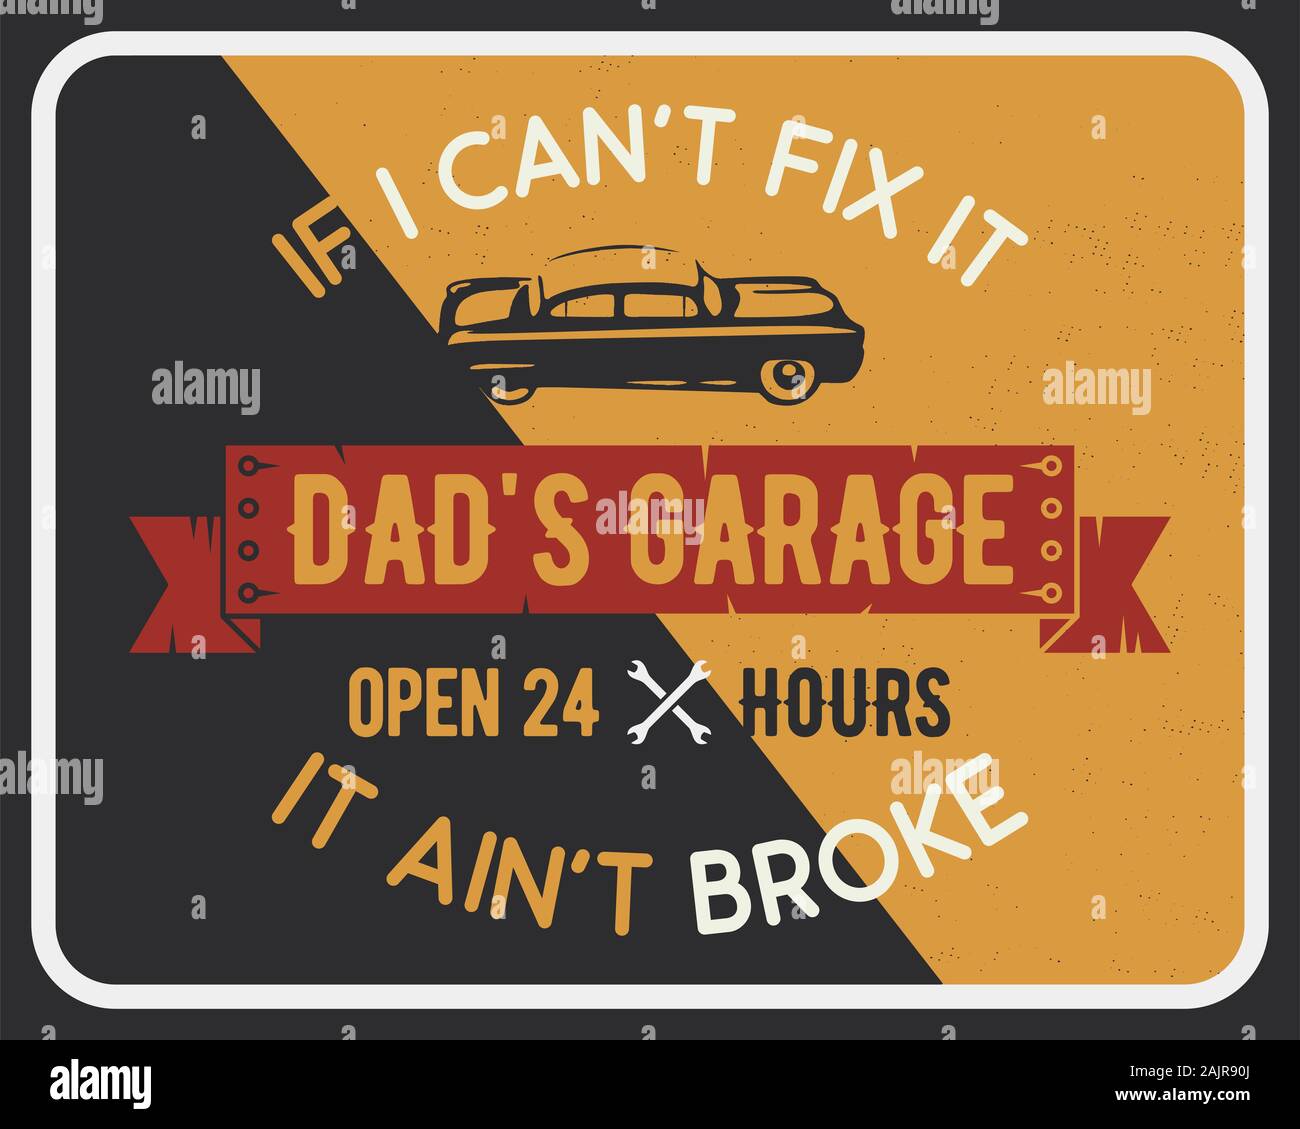 Garage poster print with slogan. Typography for t cards - dads garage. Retro vintage car service brochure design Stock Photo